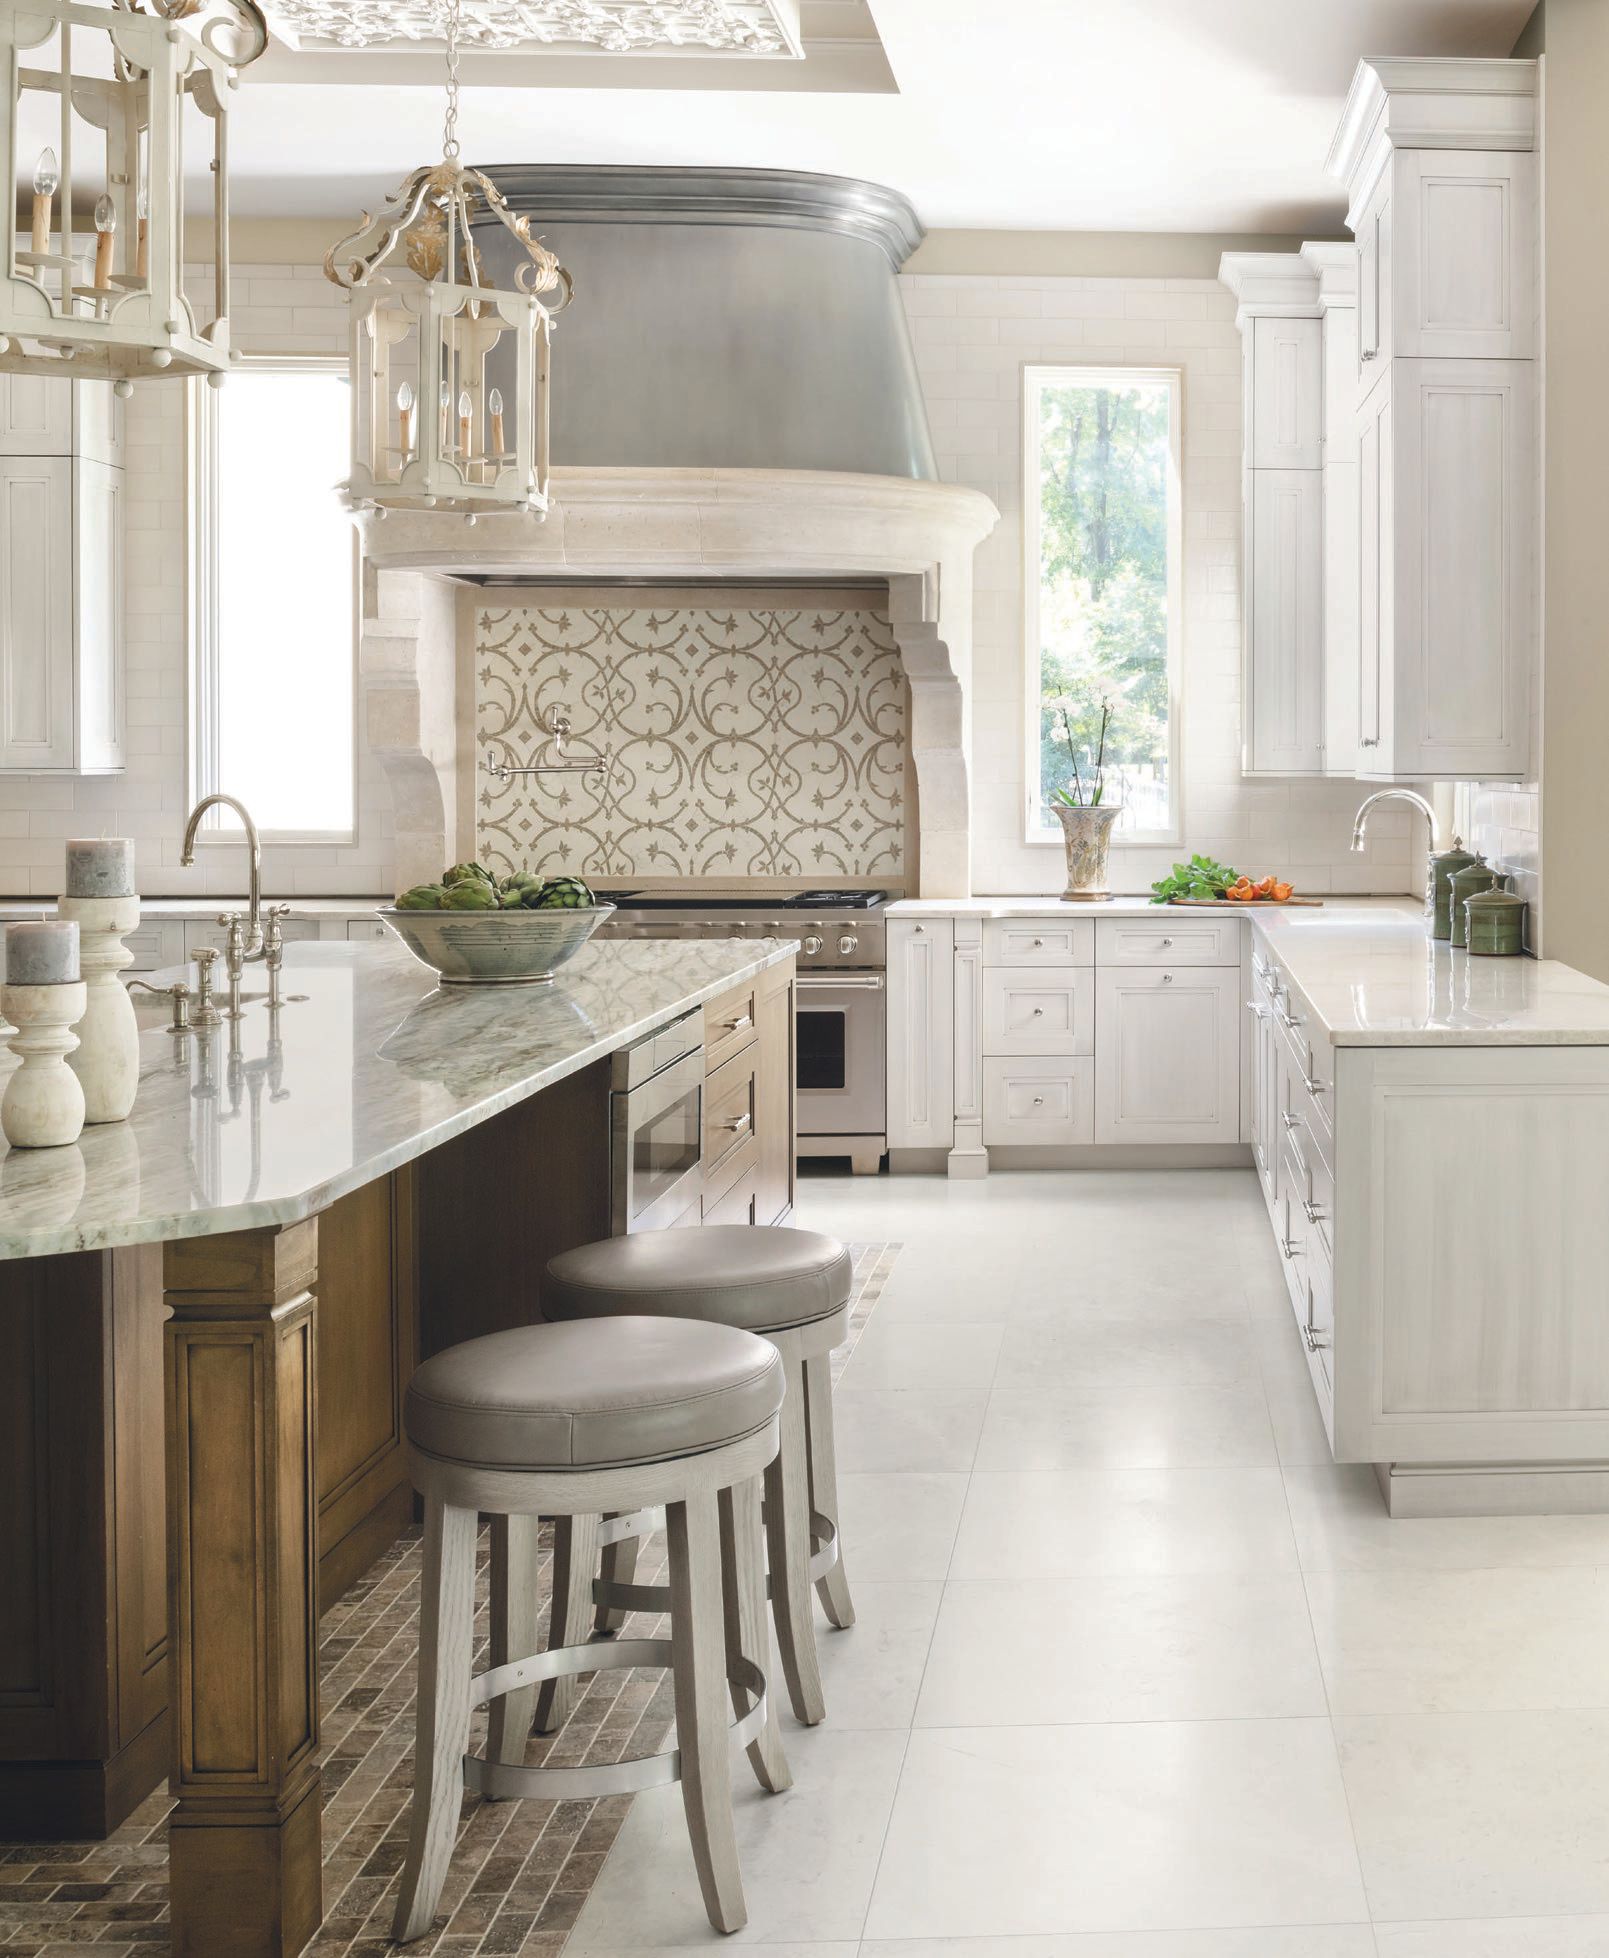 A plaster ceiling relief by Ornamental Plaster Works, white floors and cabinetry, and neutral tilework give this kitchen a bright, inviting feel. PHOTO BY ROBERT RADIFERA; STYLING BY CHARLOTTE SAFAVI